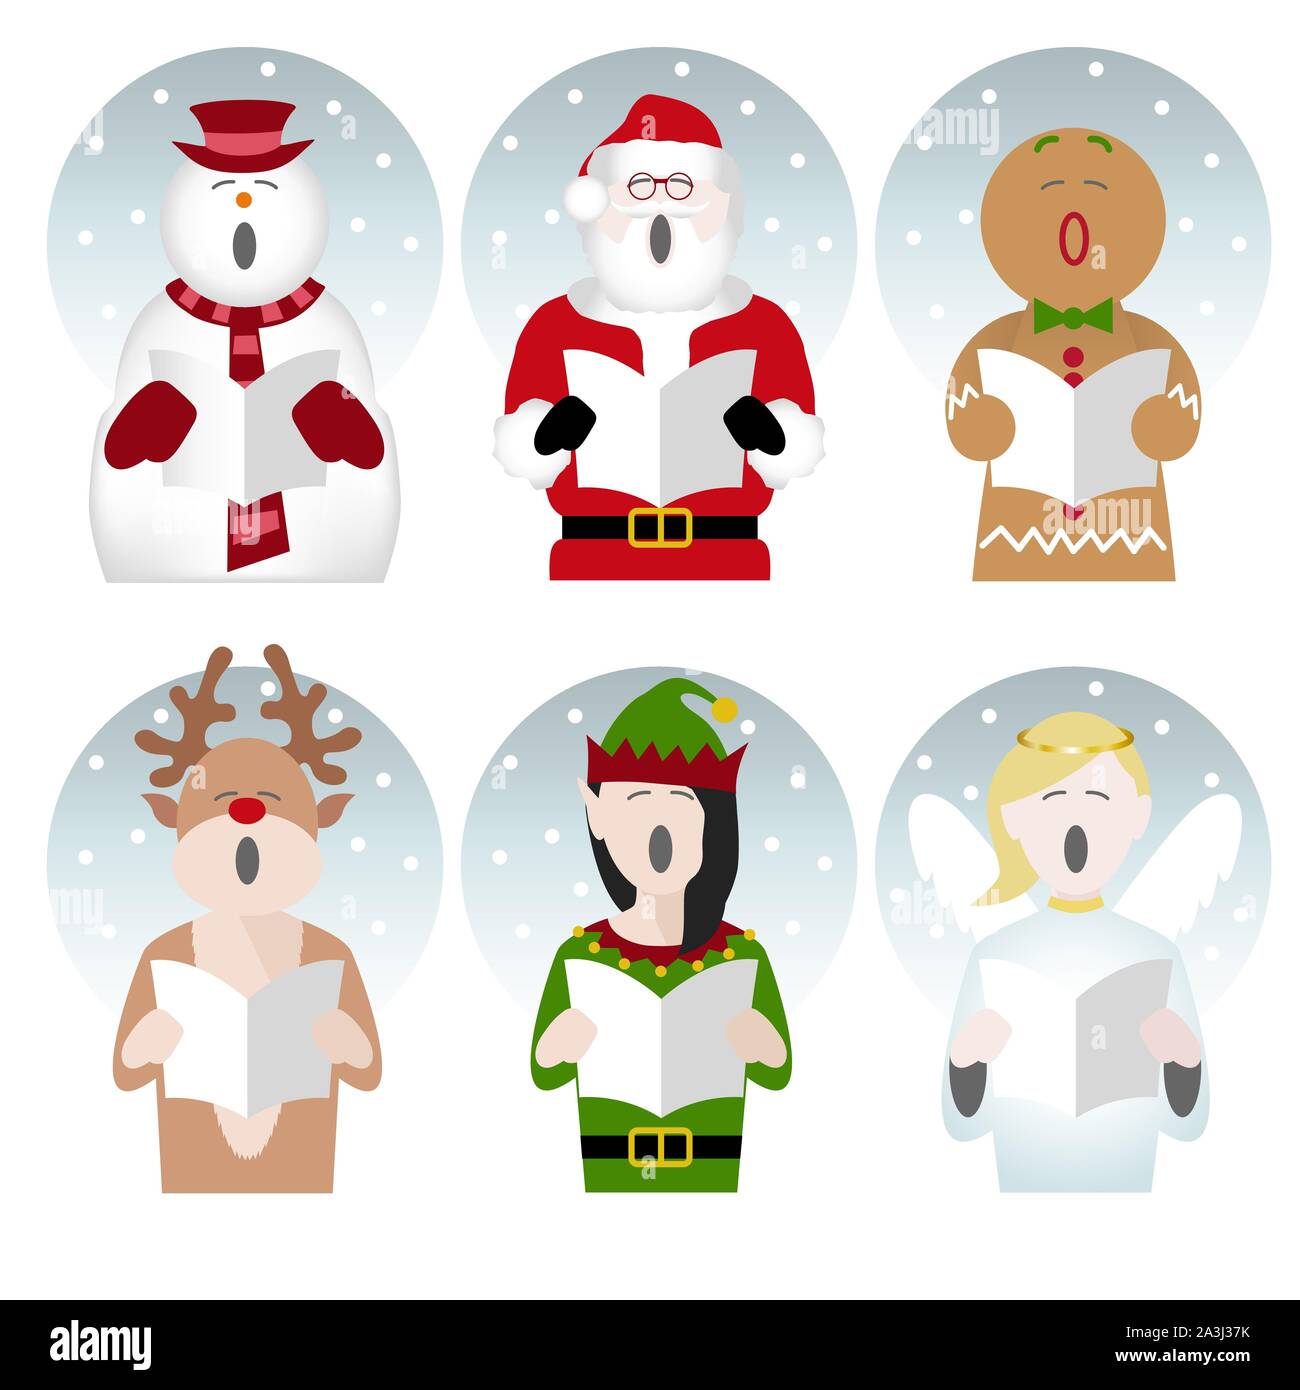 snowman, father Christmas, gingerbread man, reindeer, elf and fairy characters singing Christmas carols in the snow Stock Vector